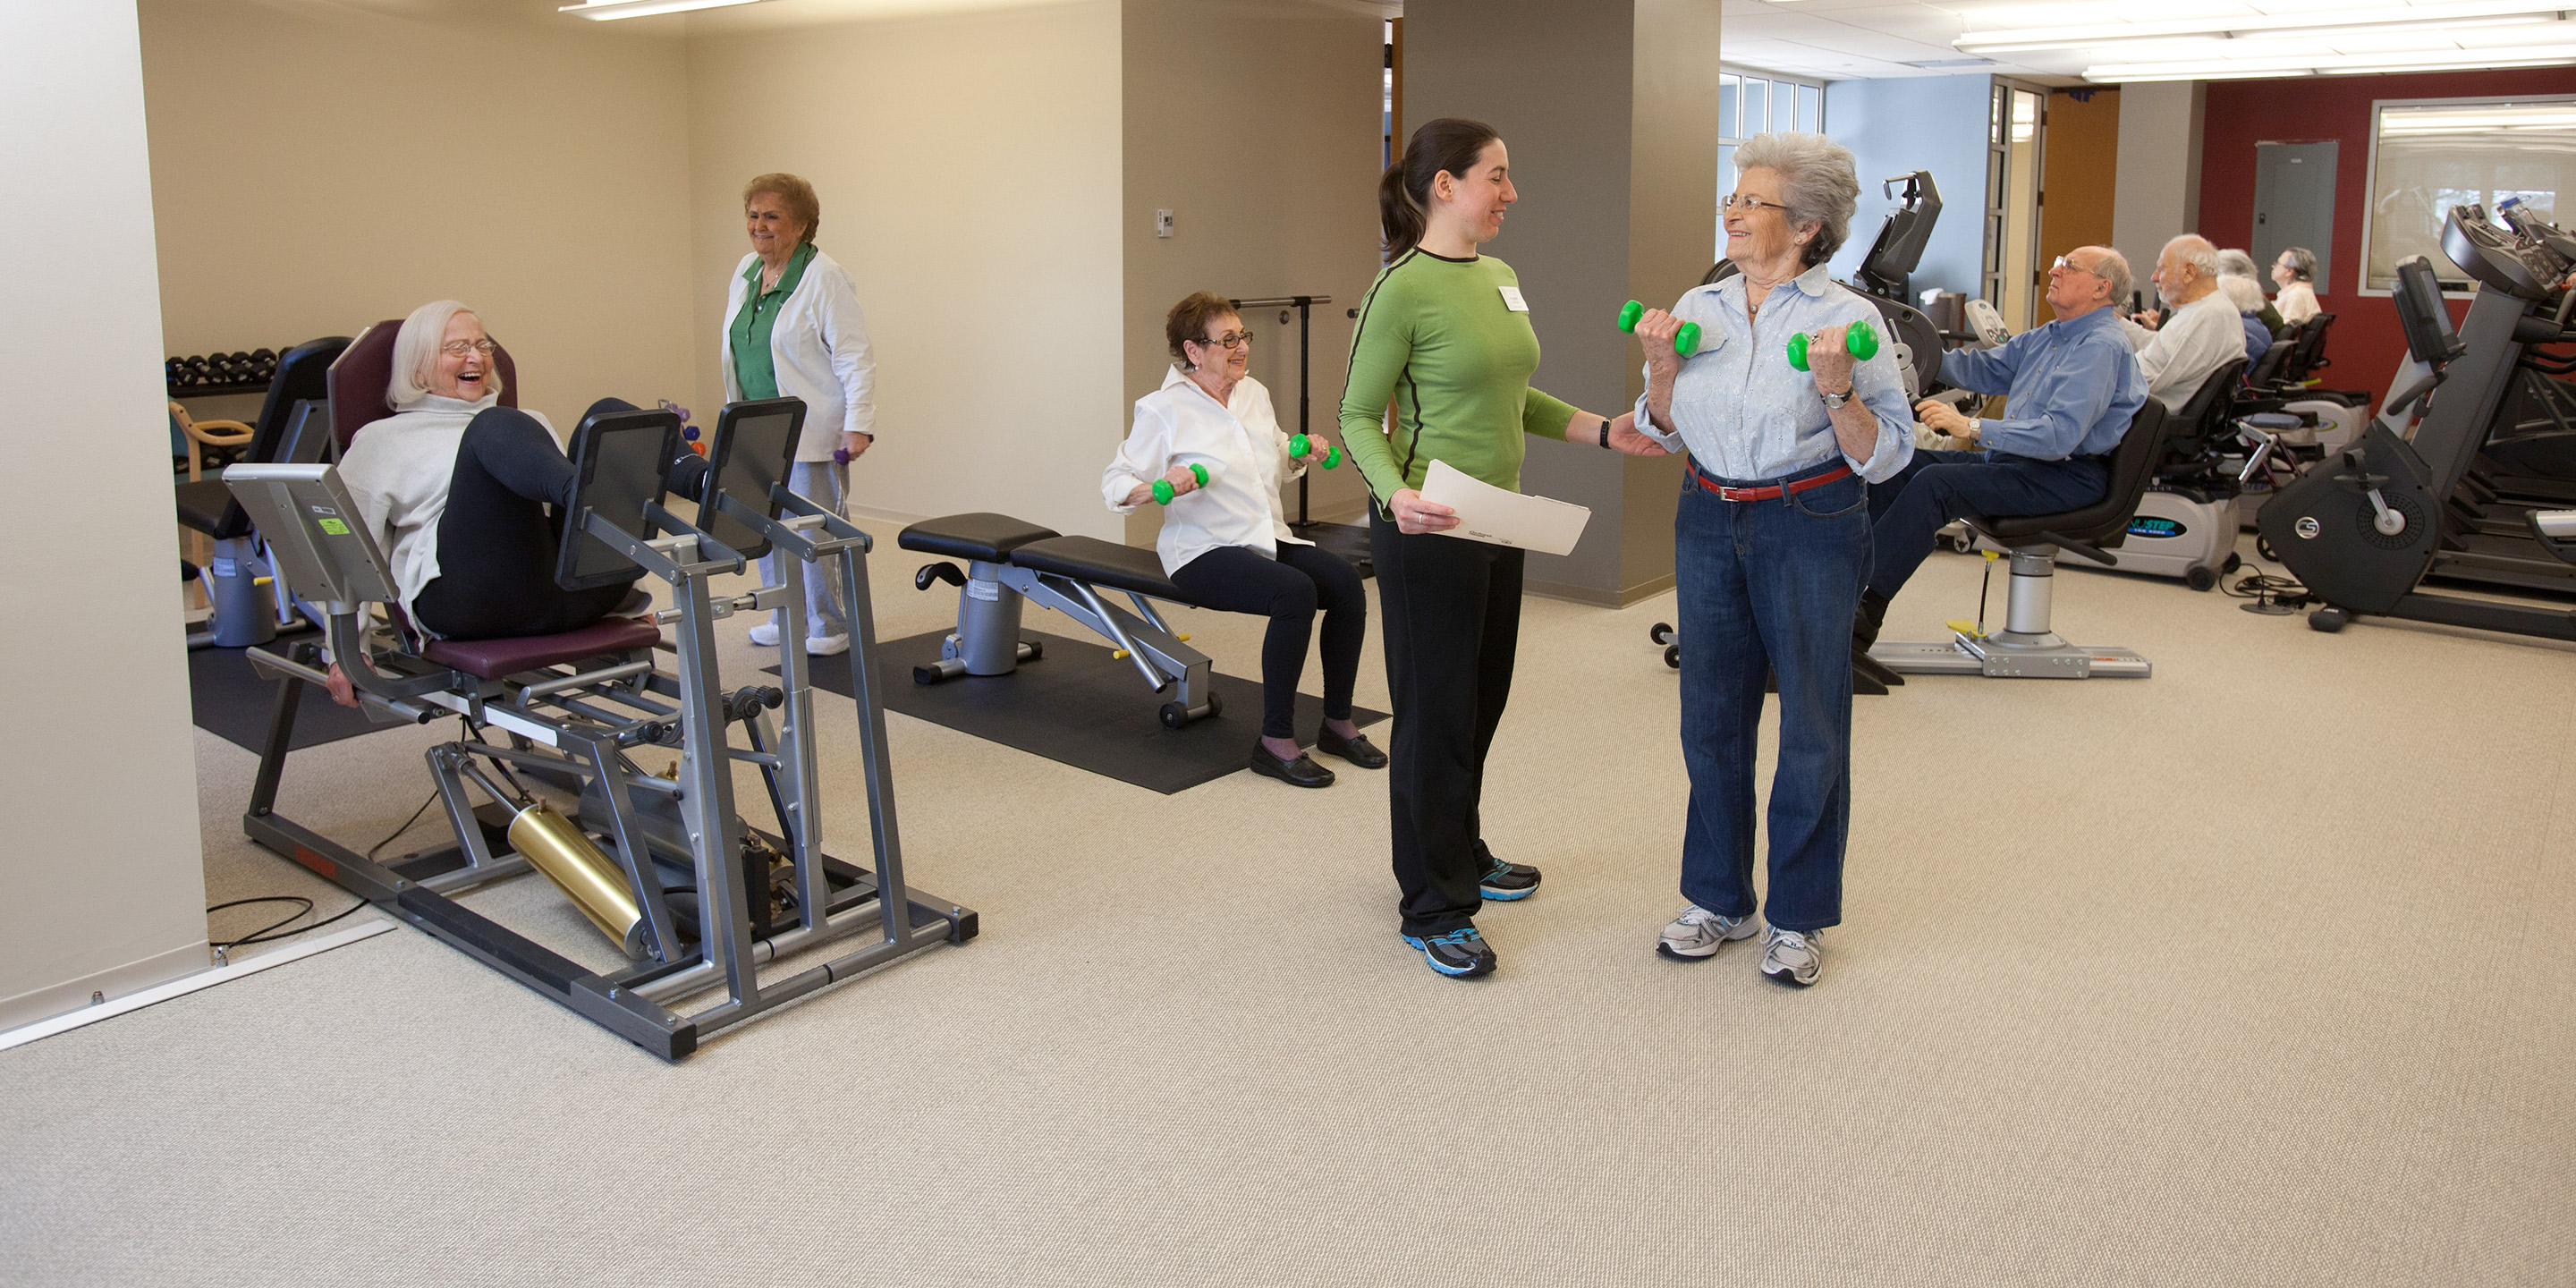 Standard Exercise Equipment Presents Safety Concerns for Seniors